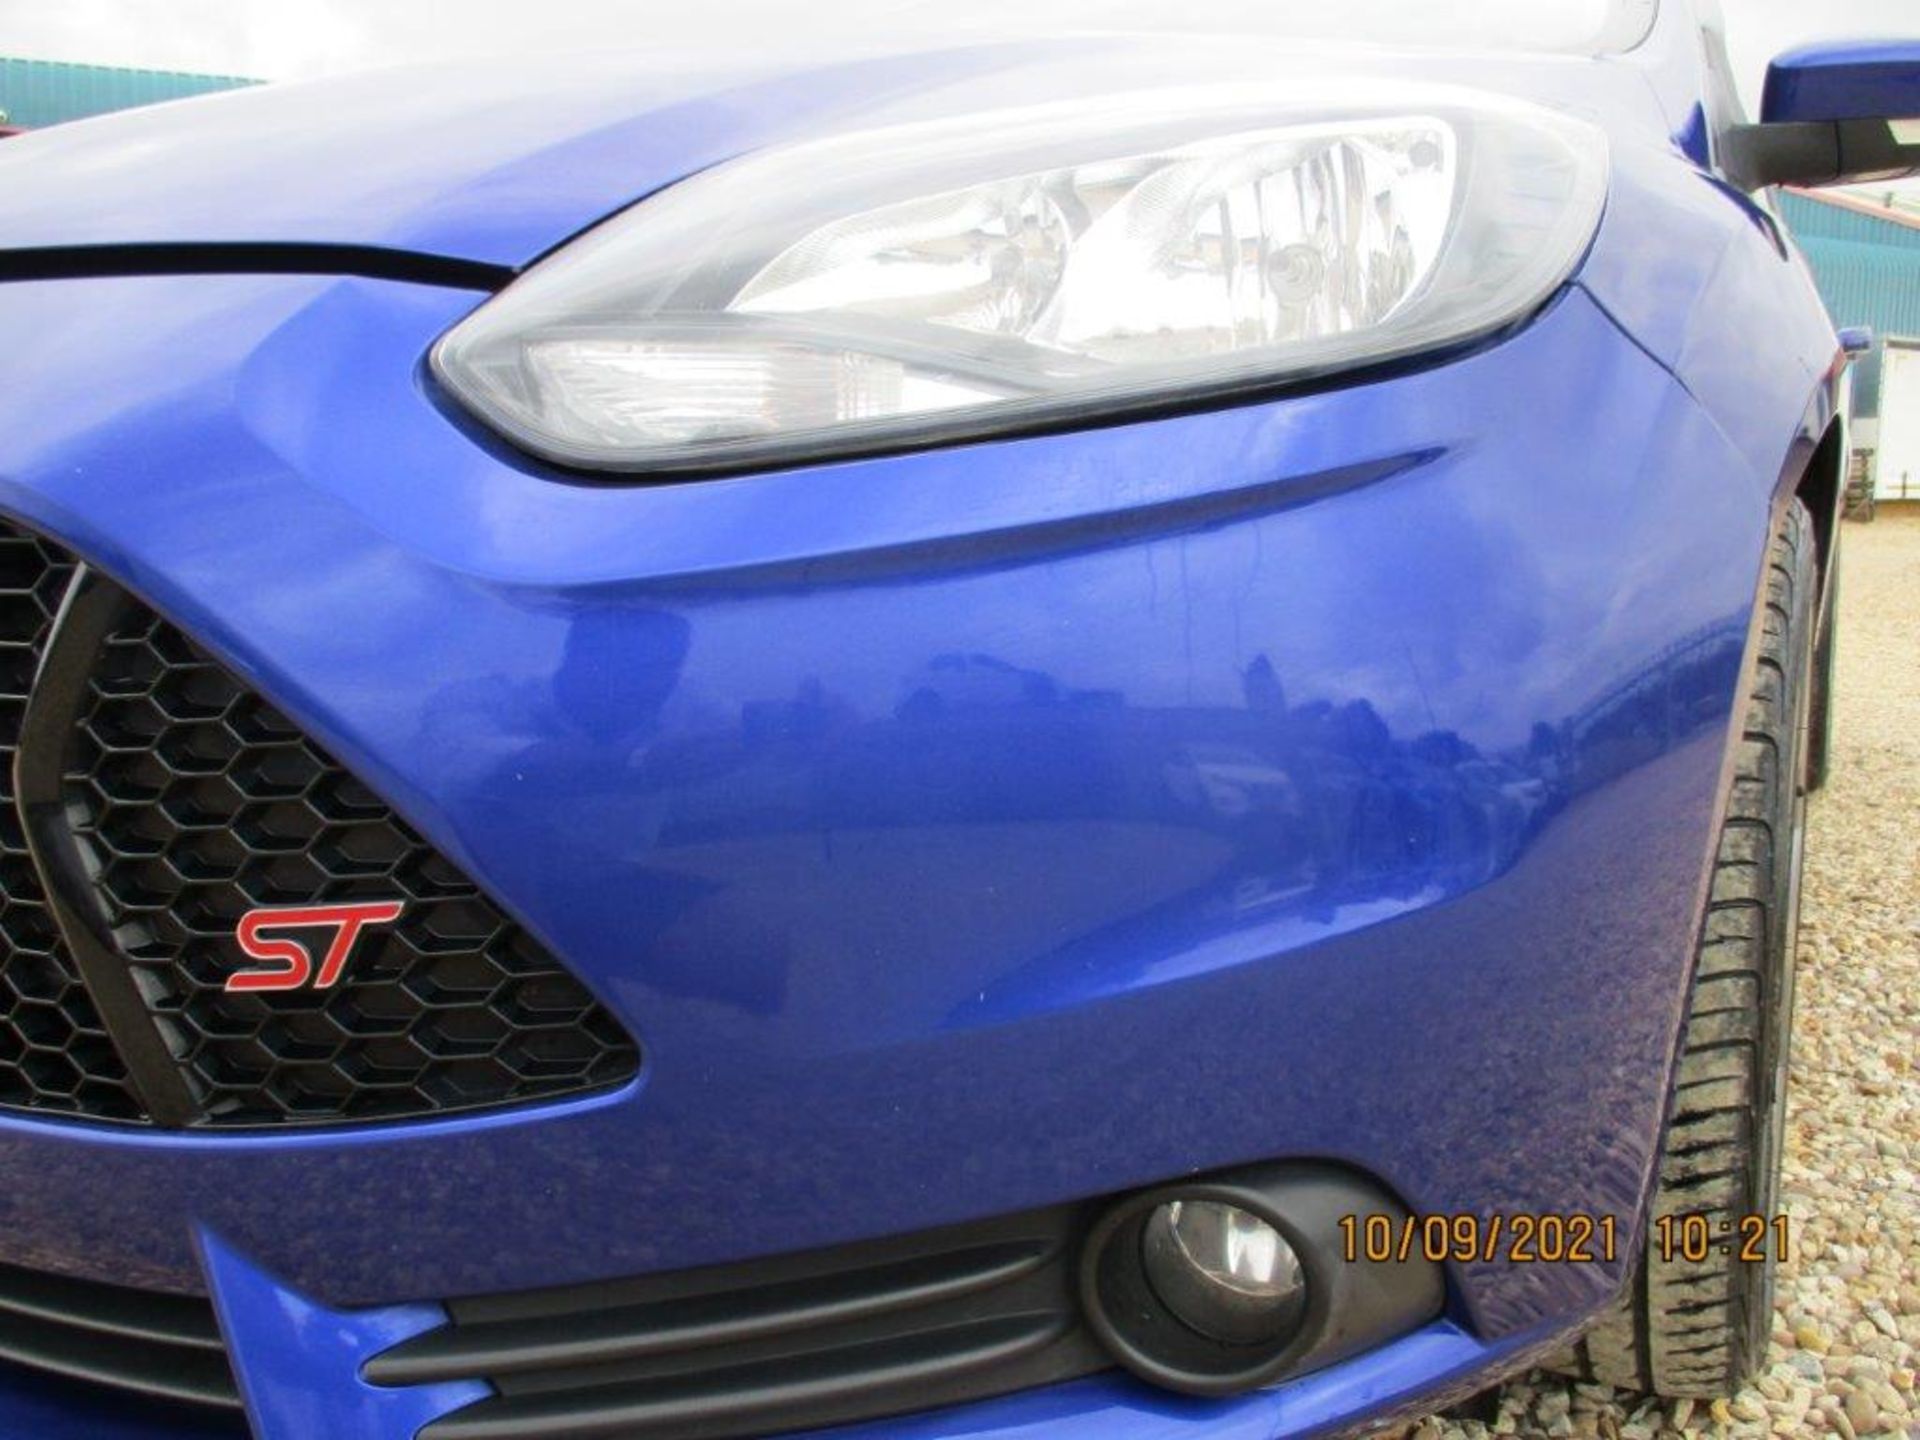 62 12 Ford Focus ST-2 Turbo - Image 23 of 31